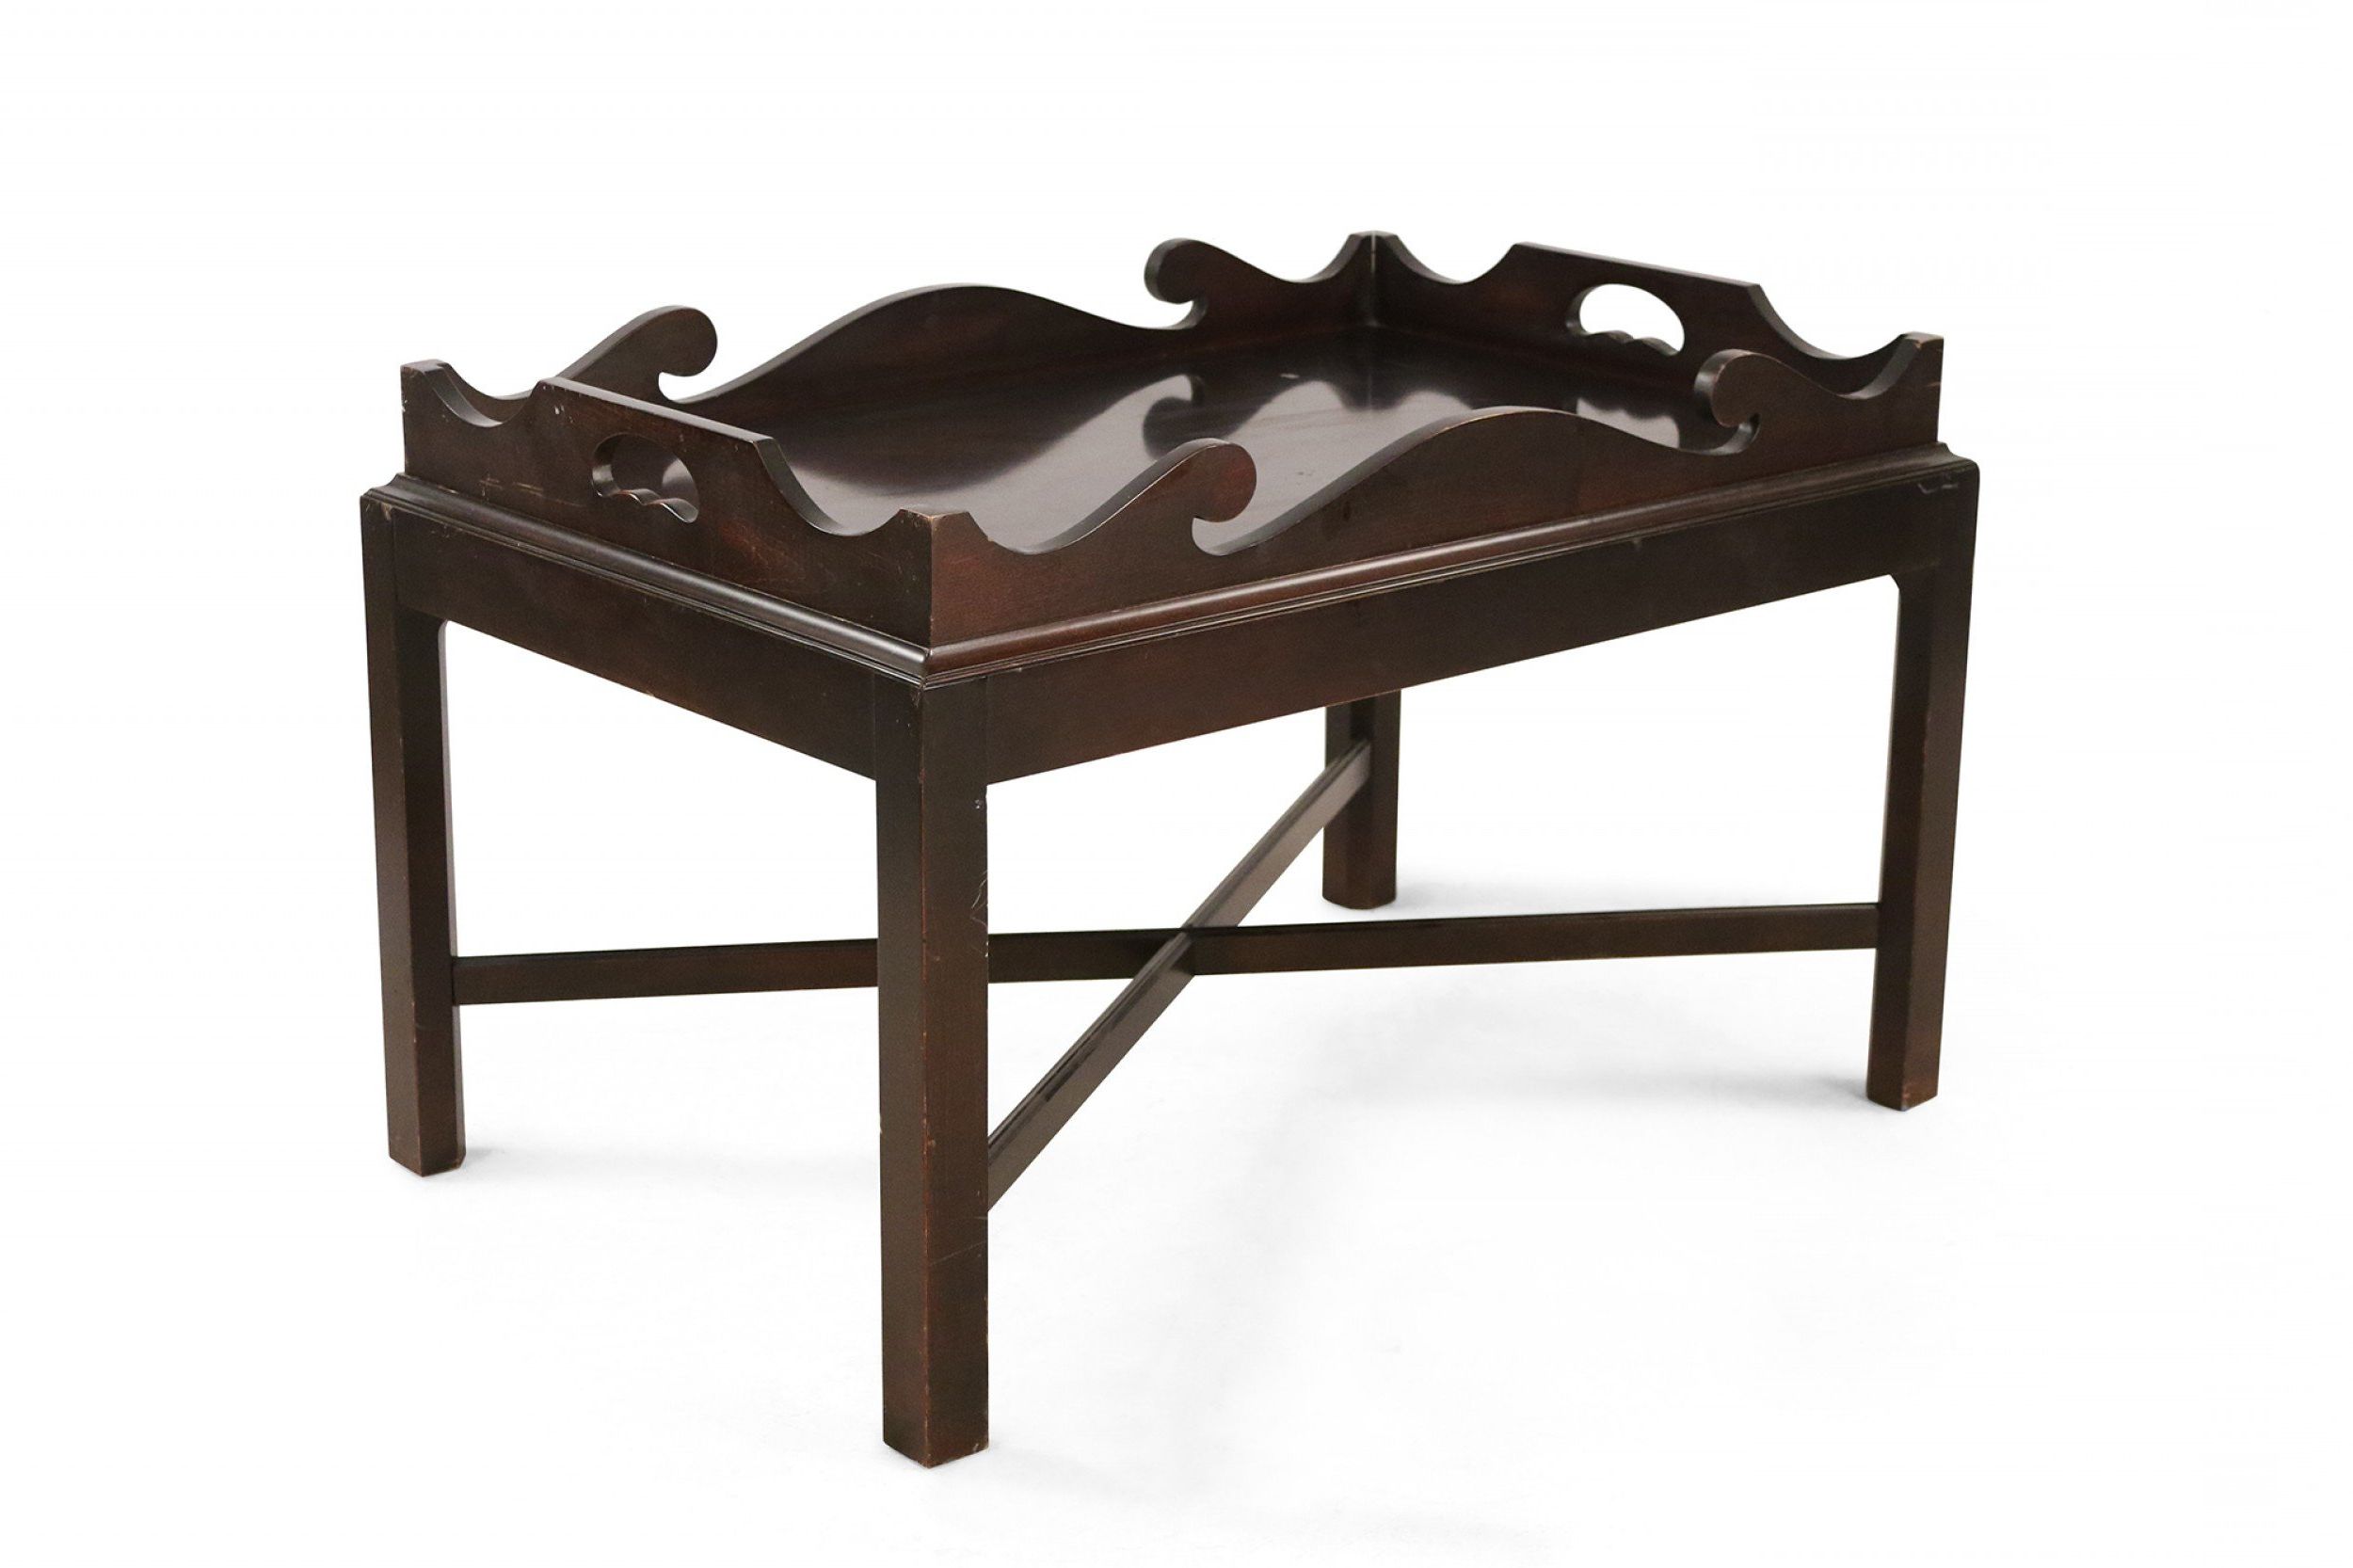 Contemporary Dark Wood Removable Tray Top Coffee Table Inside Detachable Tray Coffee Tables (View 10 of 20)